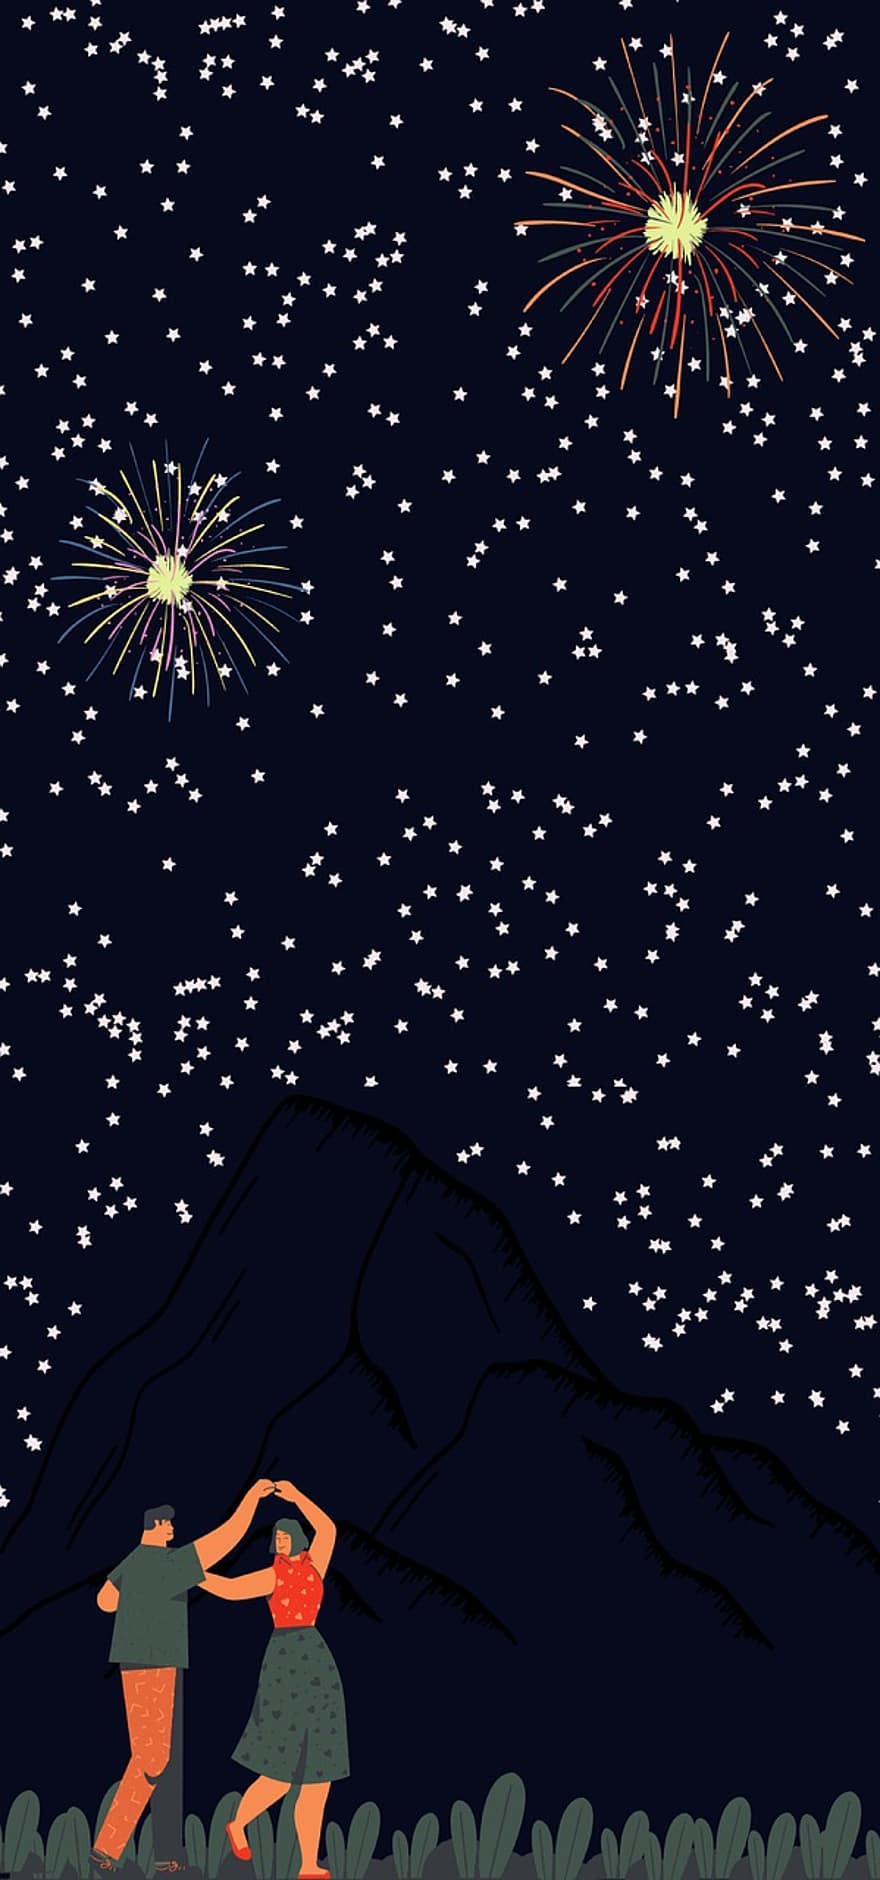 Couple, Night Sky, Wallpaper, Dancing, Stars, Starry, Fireworks, Together, Lovers, Love, Happiness